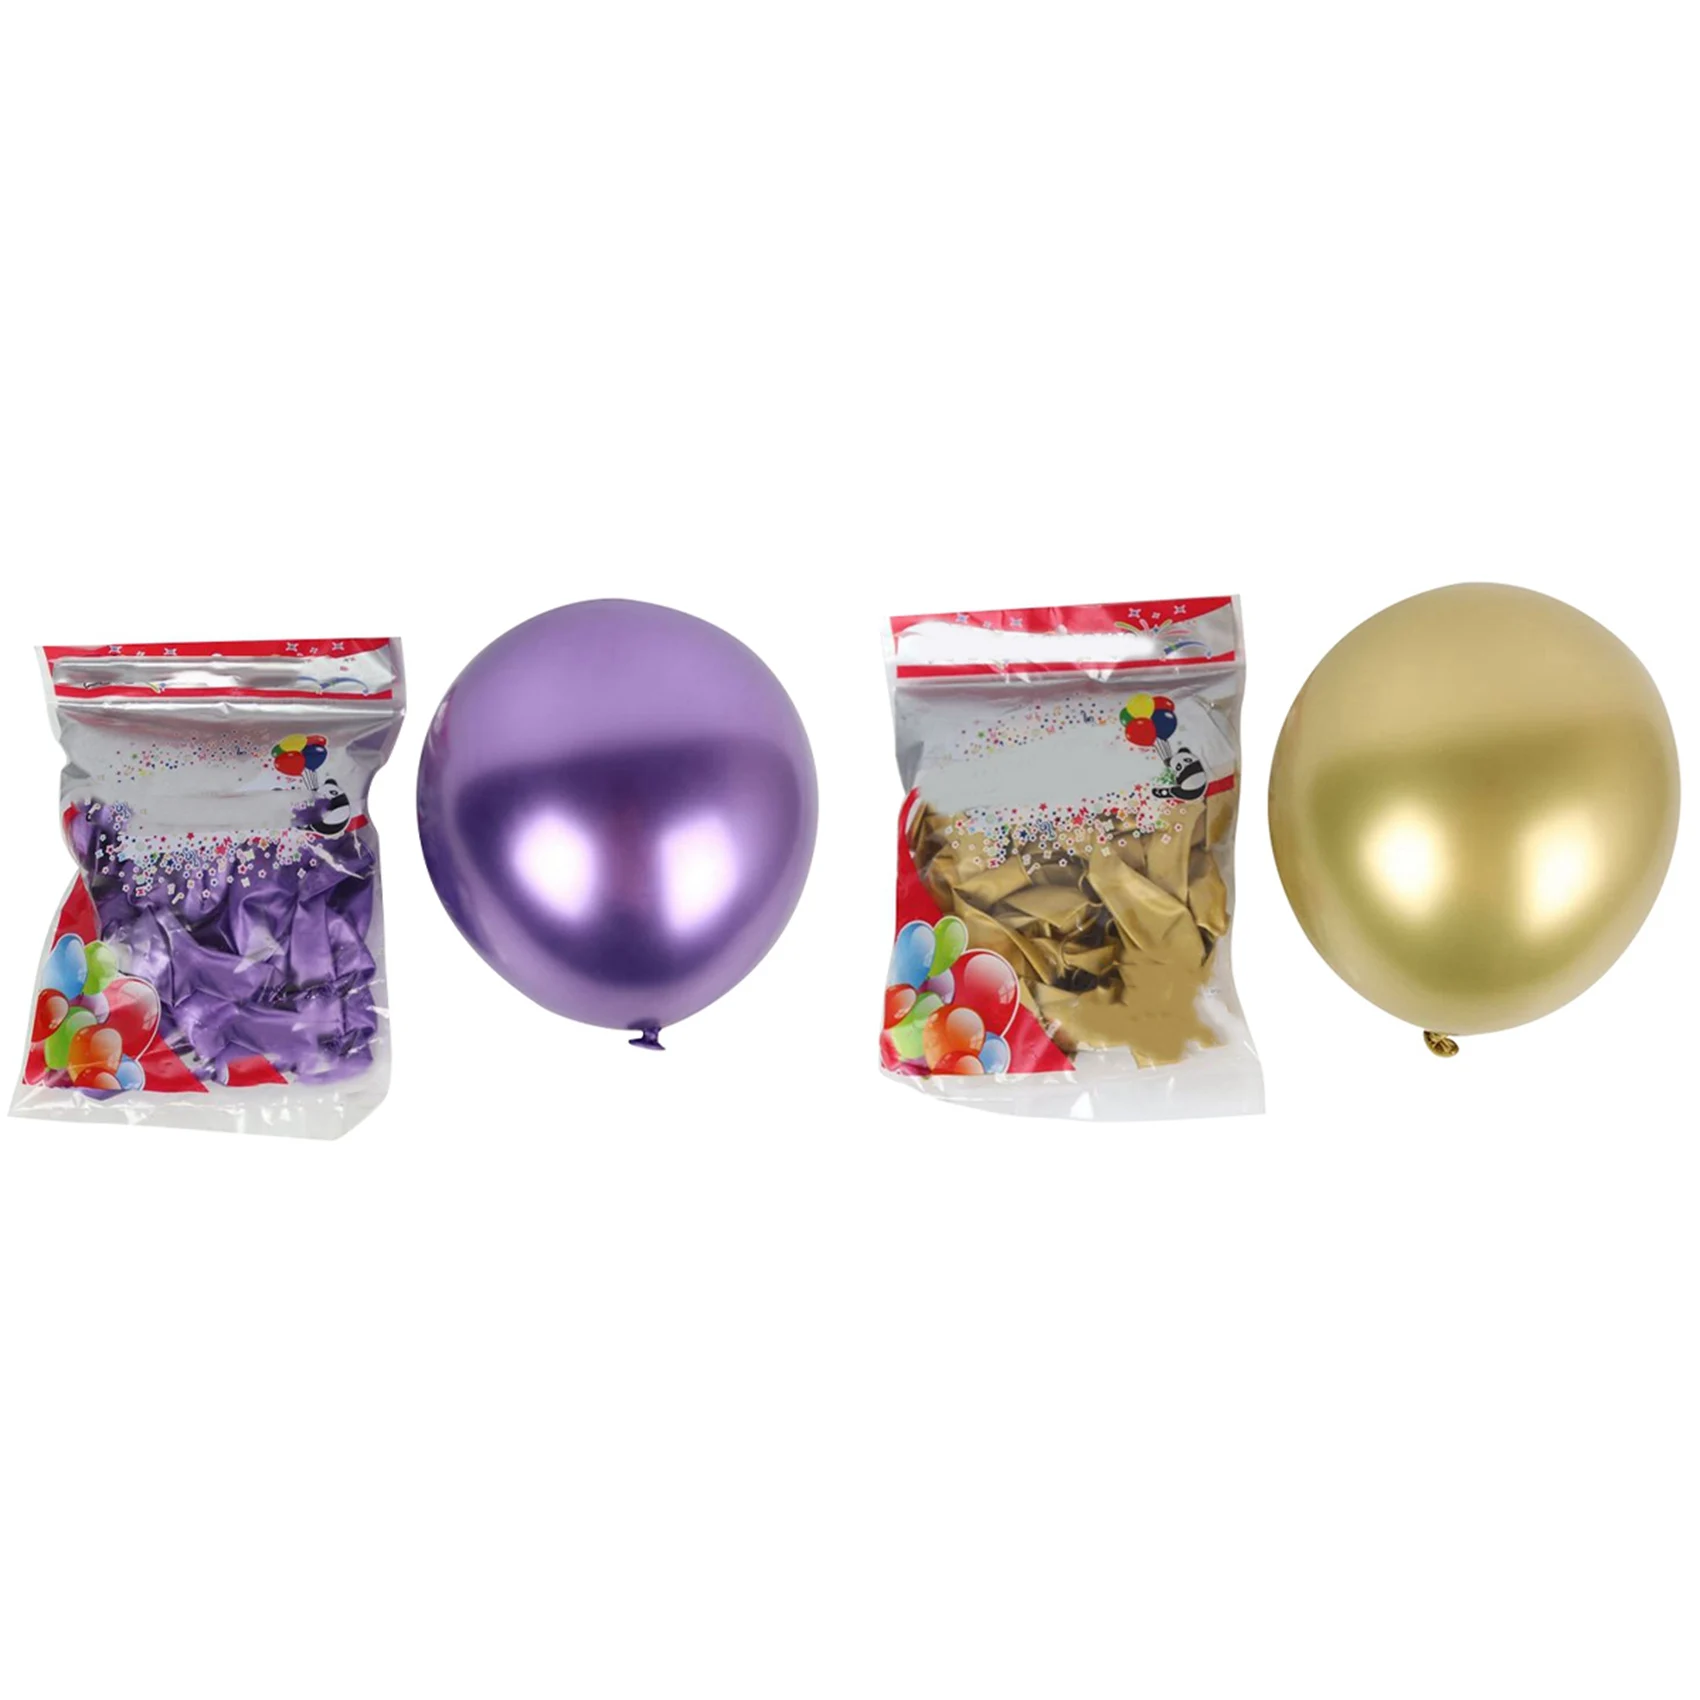 

100Pcs 10 Inch Metallic Latex Balloons Thick Chrome Glossy Metal Pearl Balloon Globos for Party Decor - Gold & Purple